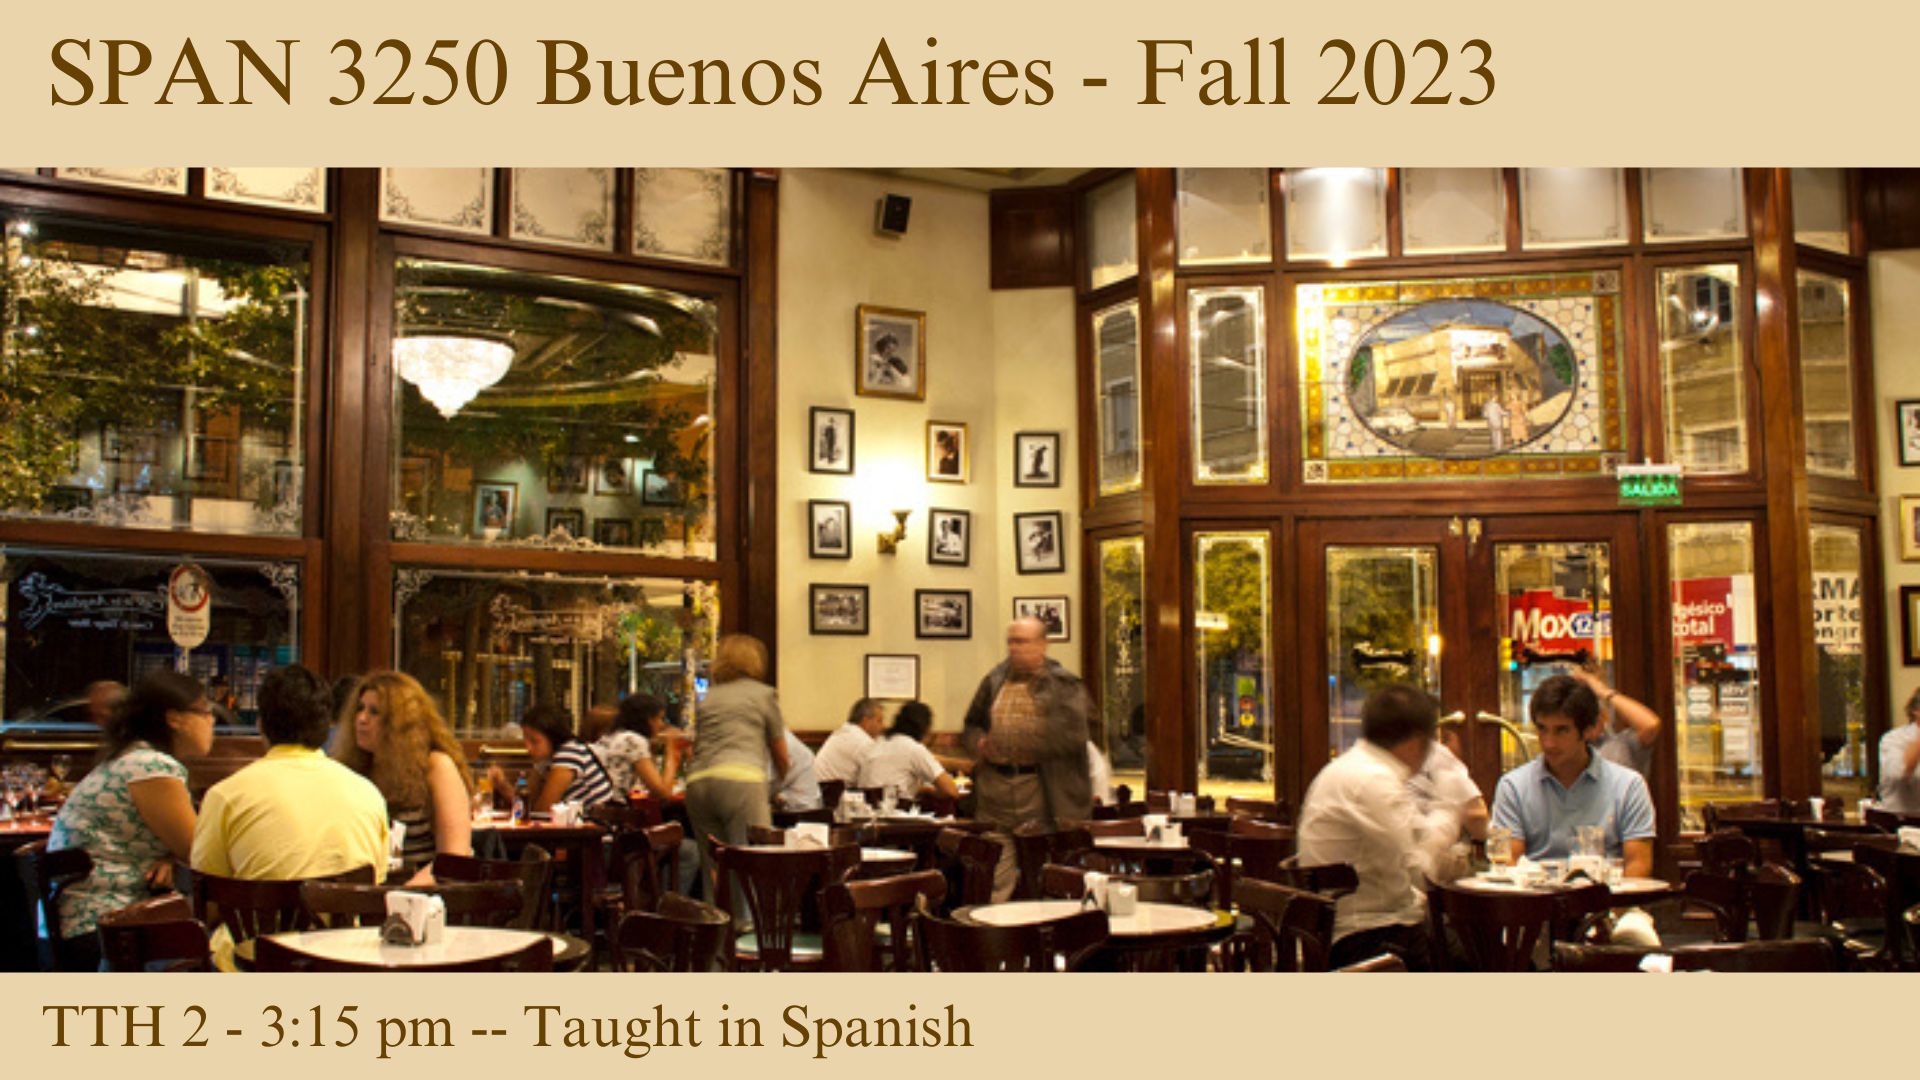 SPAN:3250 Buenos Aires - Fall 2023 - Tuesday Thursday at 3:15 pm - Taught in Spanish